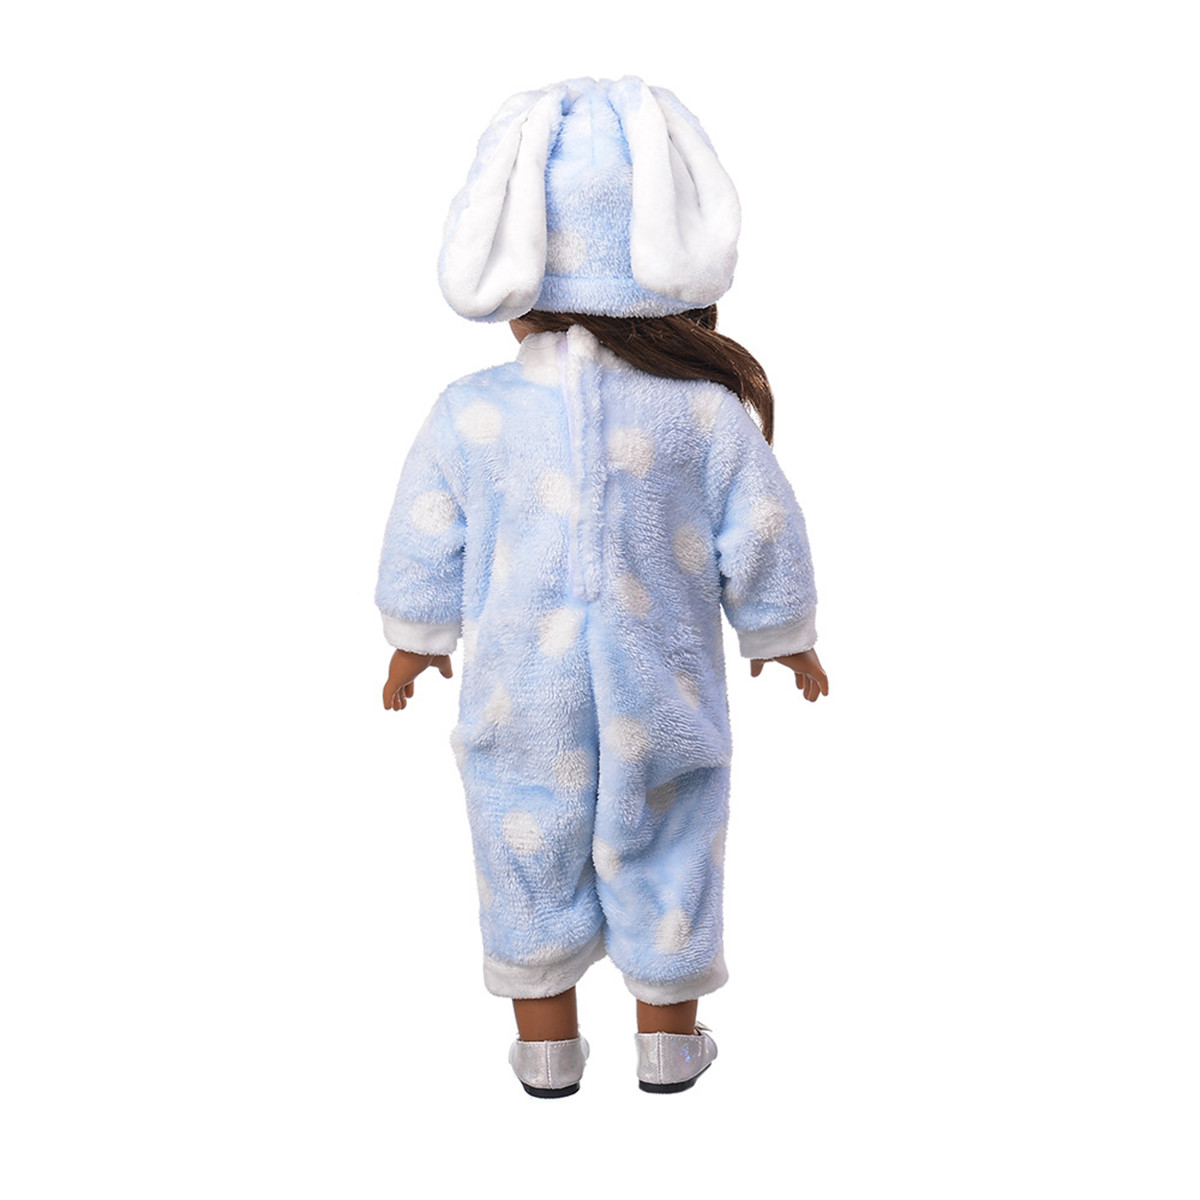 Dolls-Pajamas-Sleeping-Clothes-Fit-For-Doll-Jumpsuit-Suit-With-Cute-Hat-18inch-Kids-Birthday-Gift-1344738